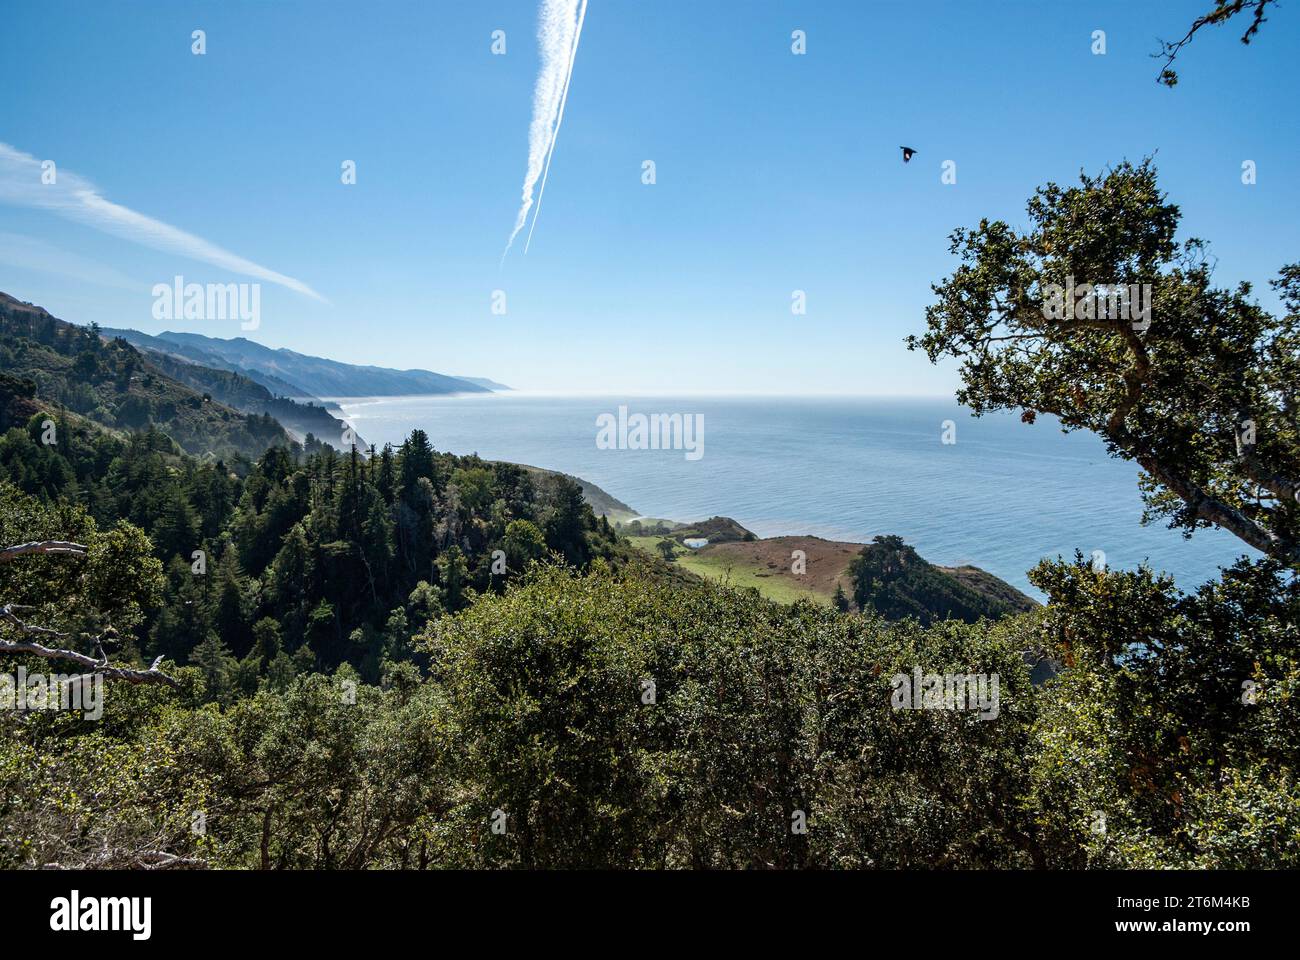 Overlooking Pacific Ocean and Los Padres National Forest from verandah of Nepenthe Restaurant, Big Sur, California Stock Photo